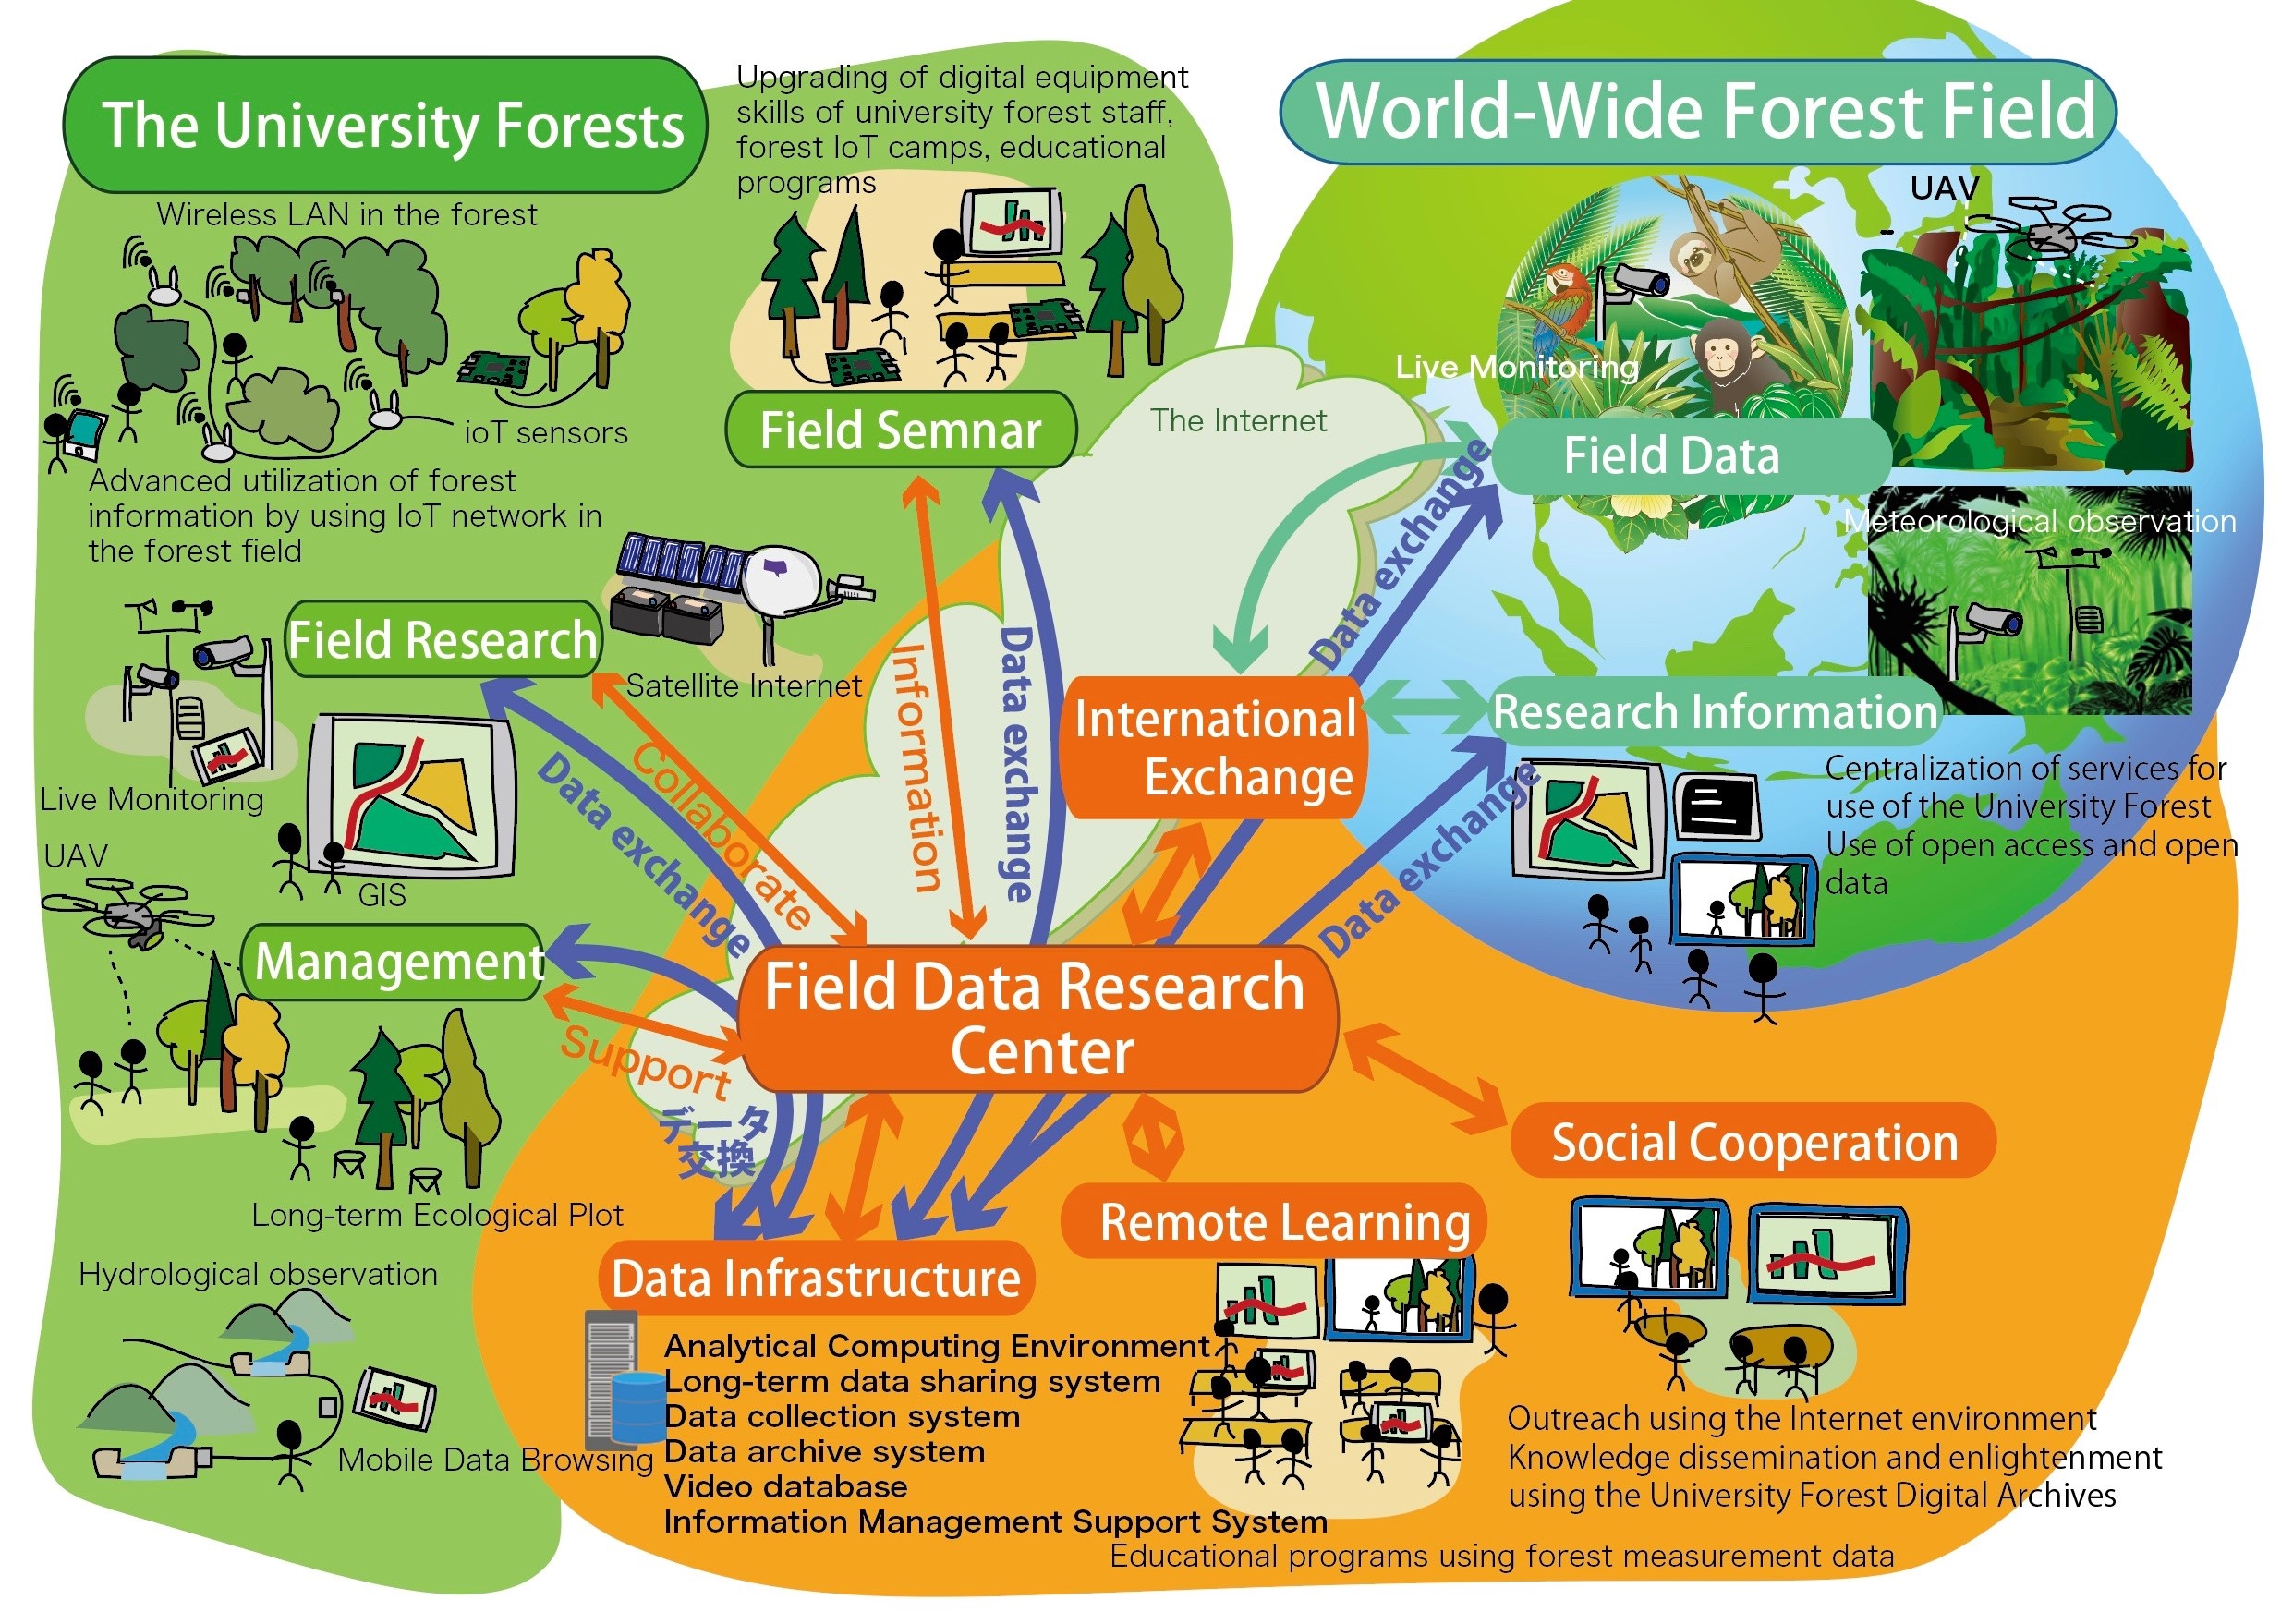 Digital Transformation (DX) of Forest Field Data Management by the Field Data Research Center